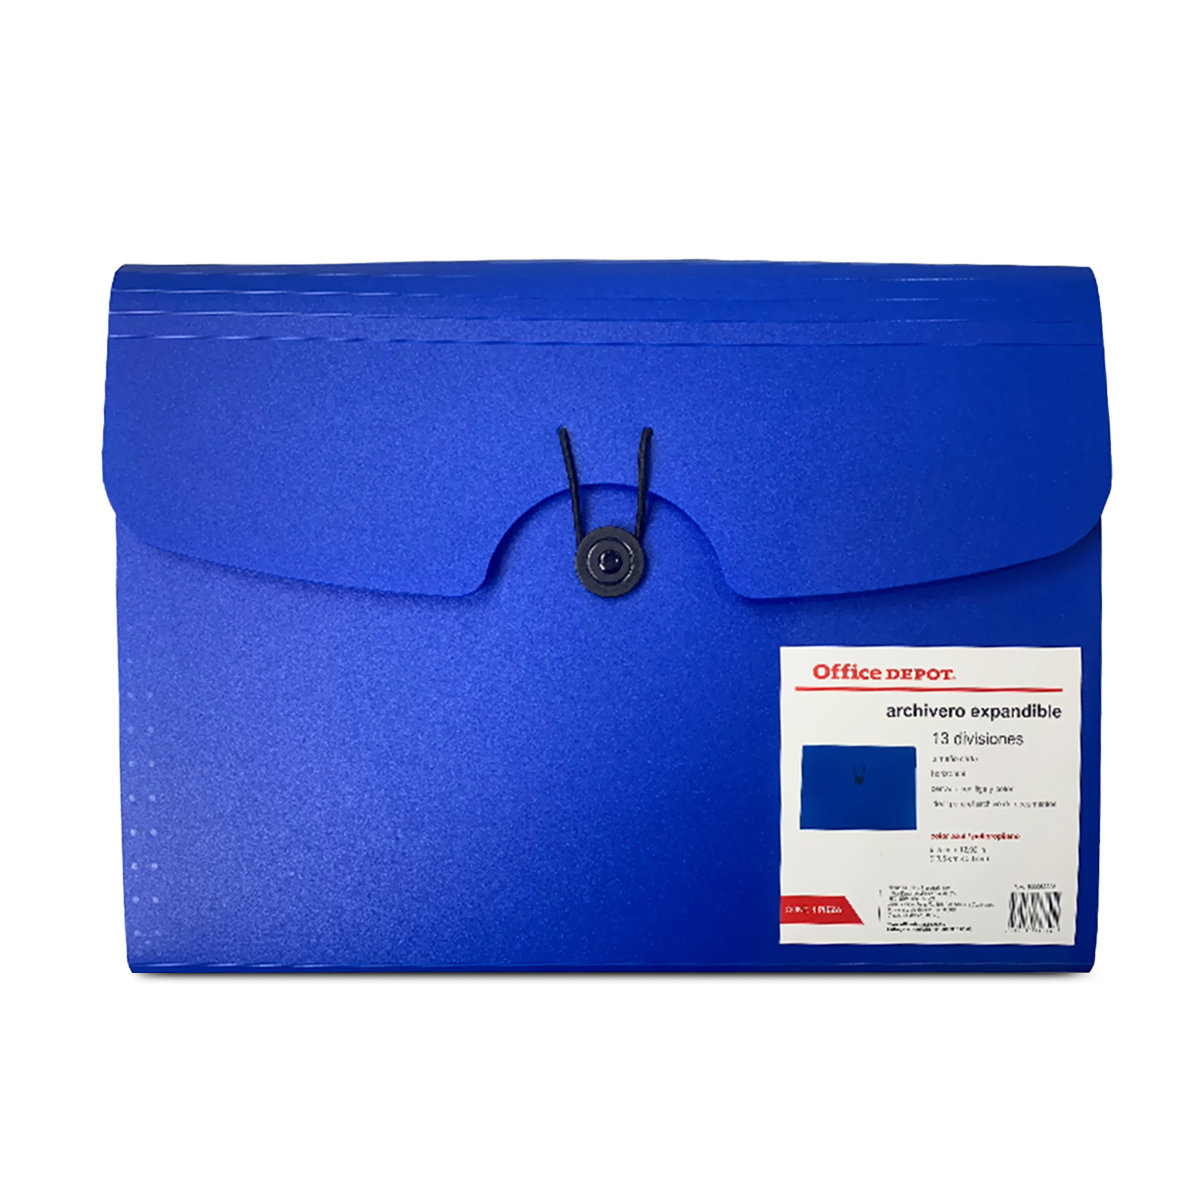 Archivero Expandible Office Depot UW-PP1008 Azul 12 divisiones | Office  Depot Mexico